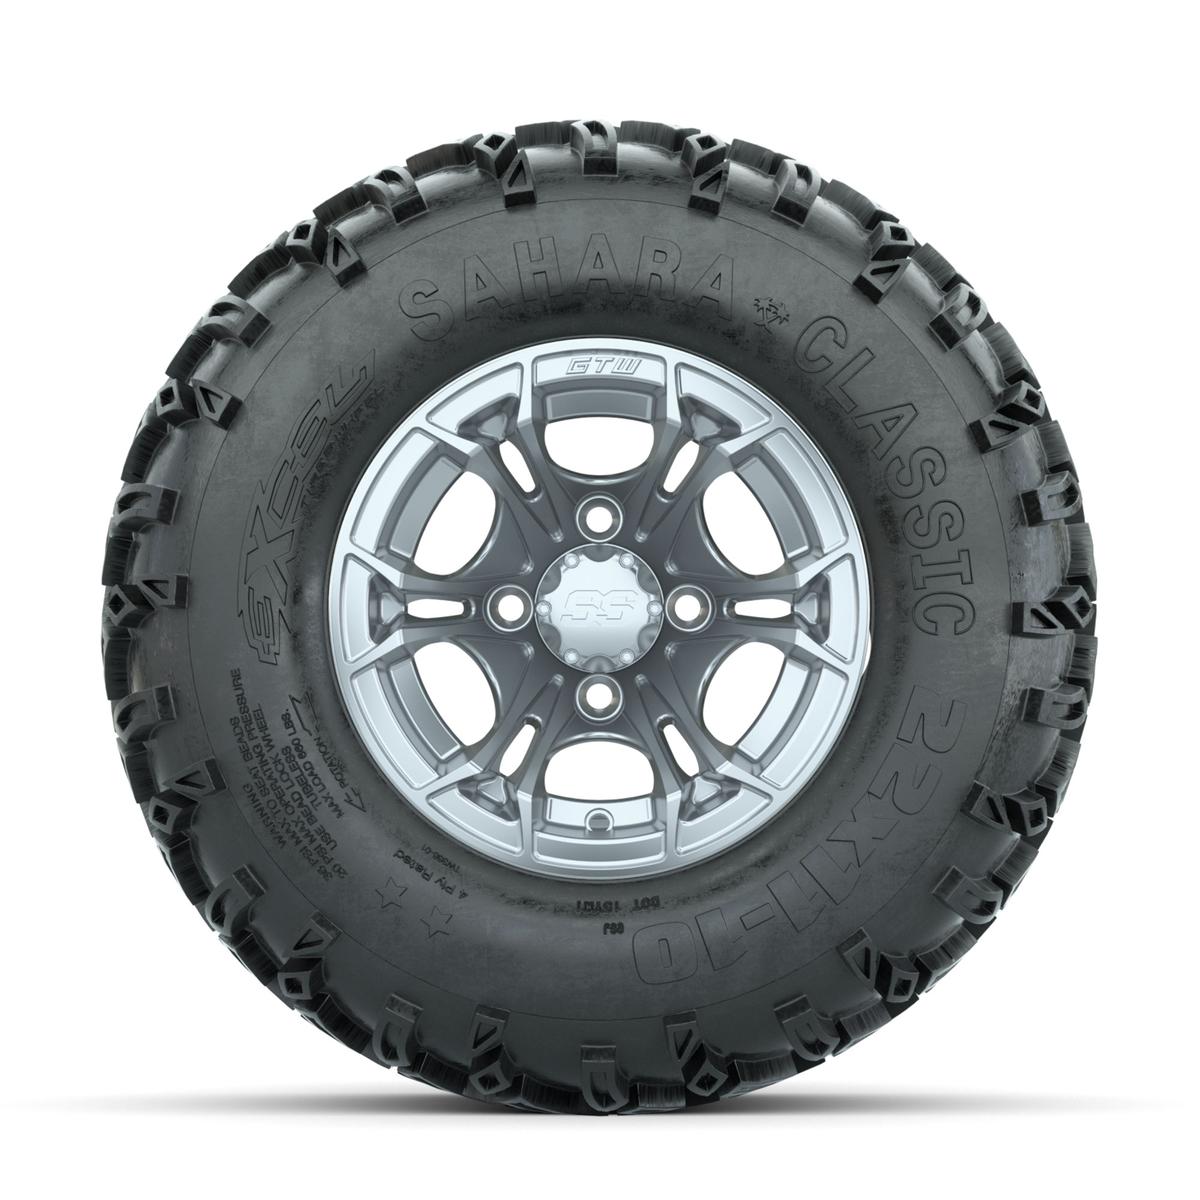 GTW Spyder Silver Brush 10 in Wheels with 22x11-10 Sahara Classic All Terrain Tires – Full Set